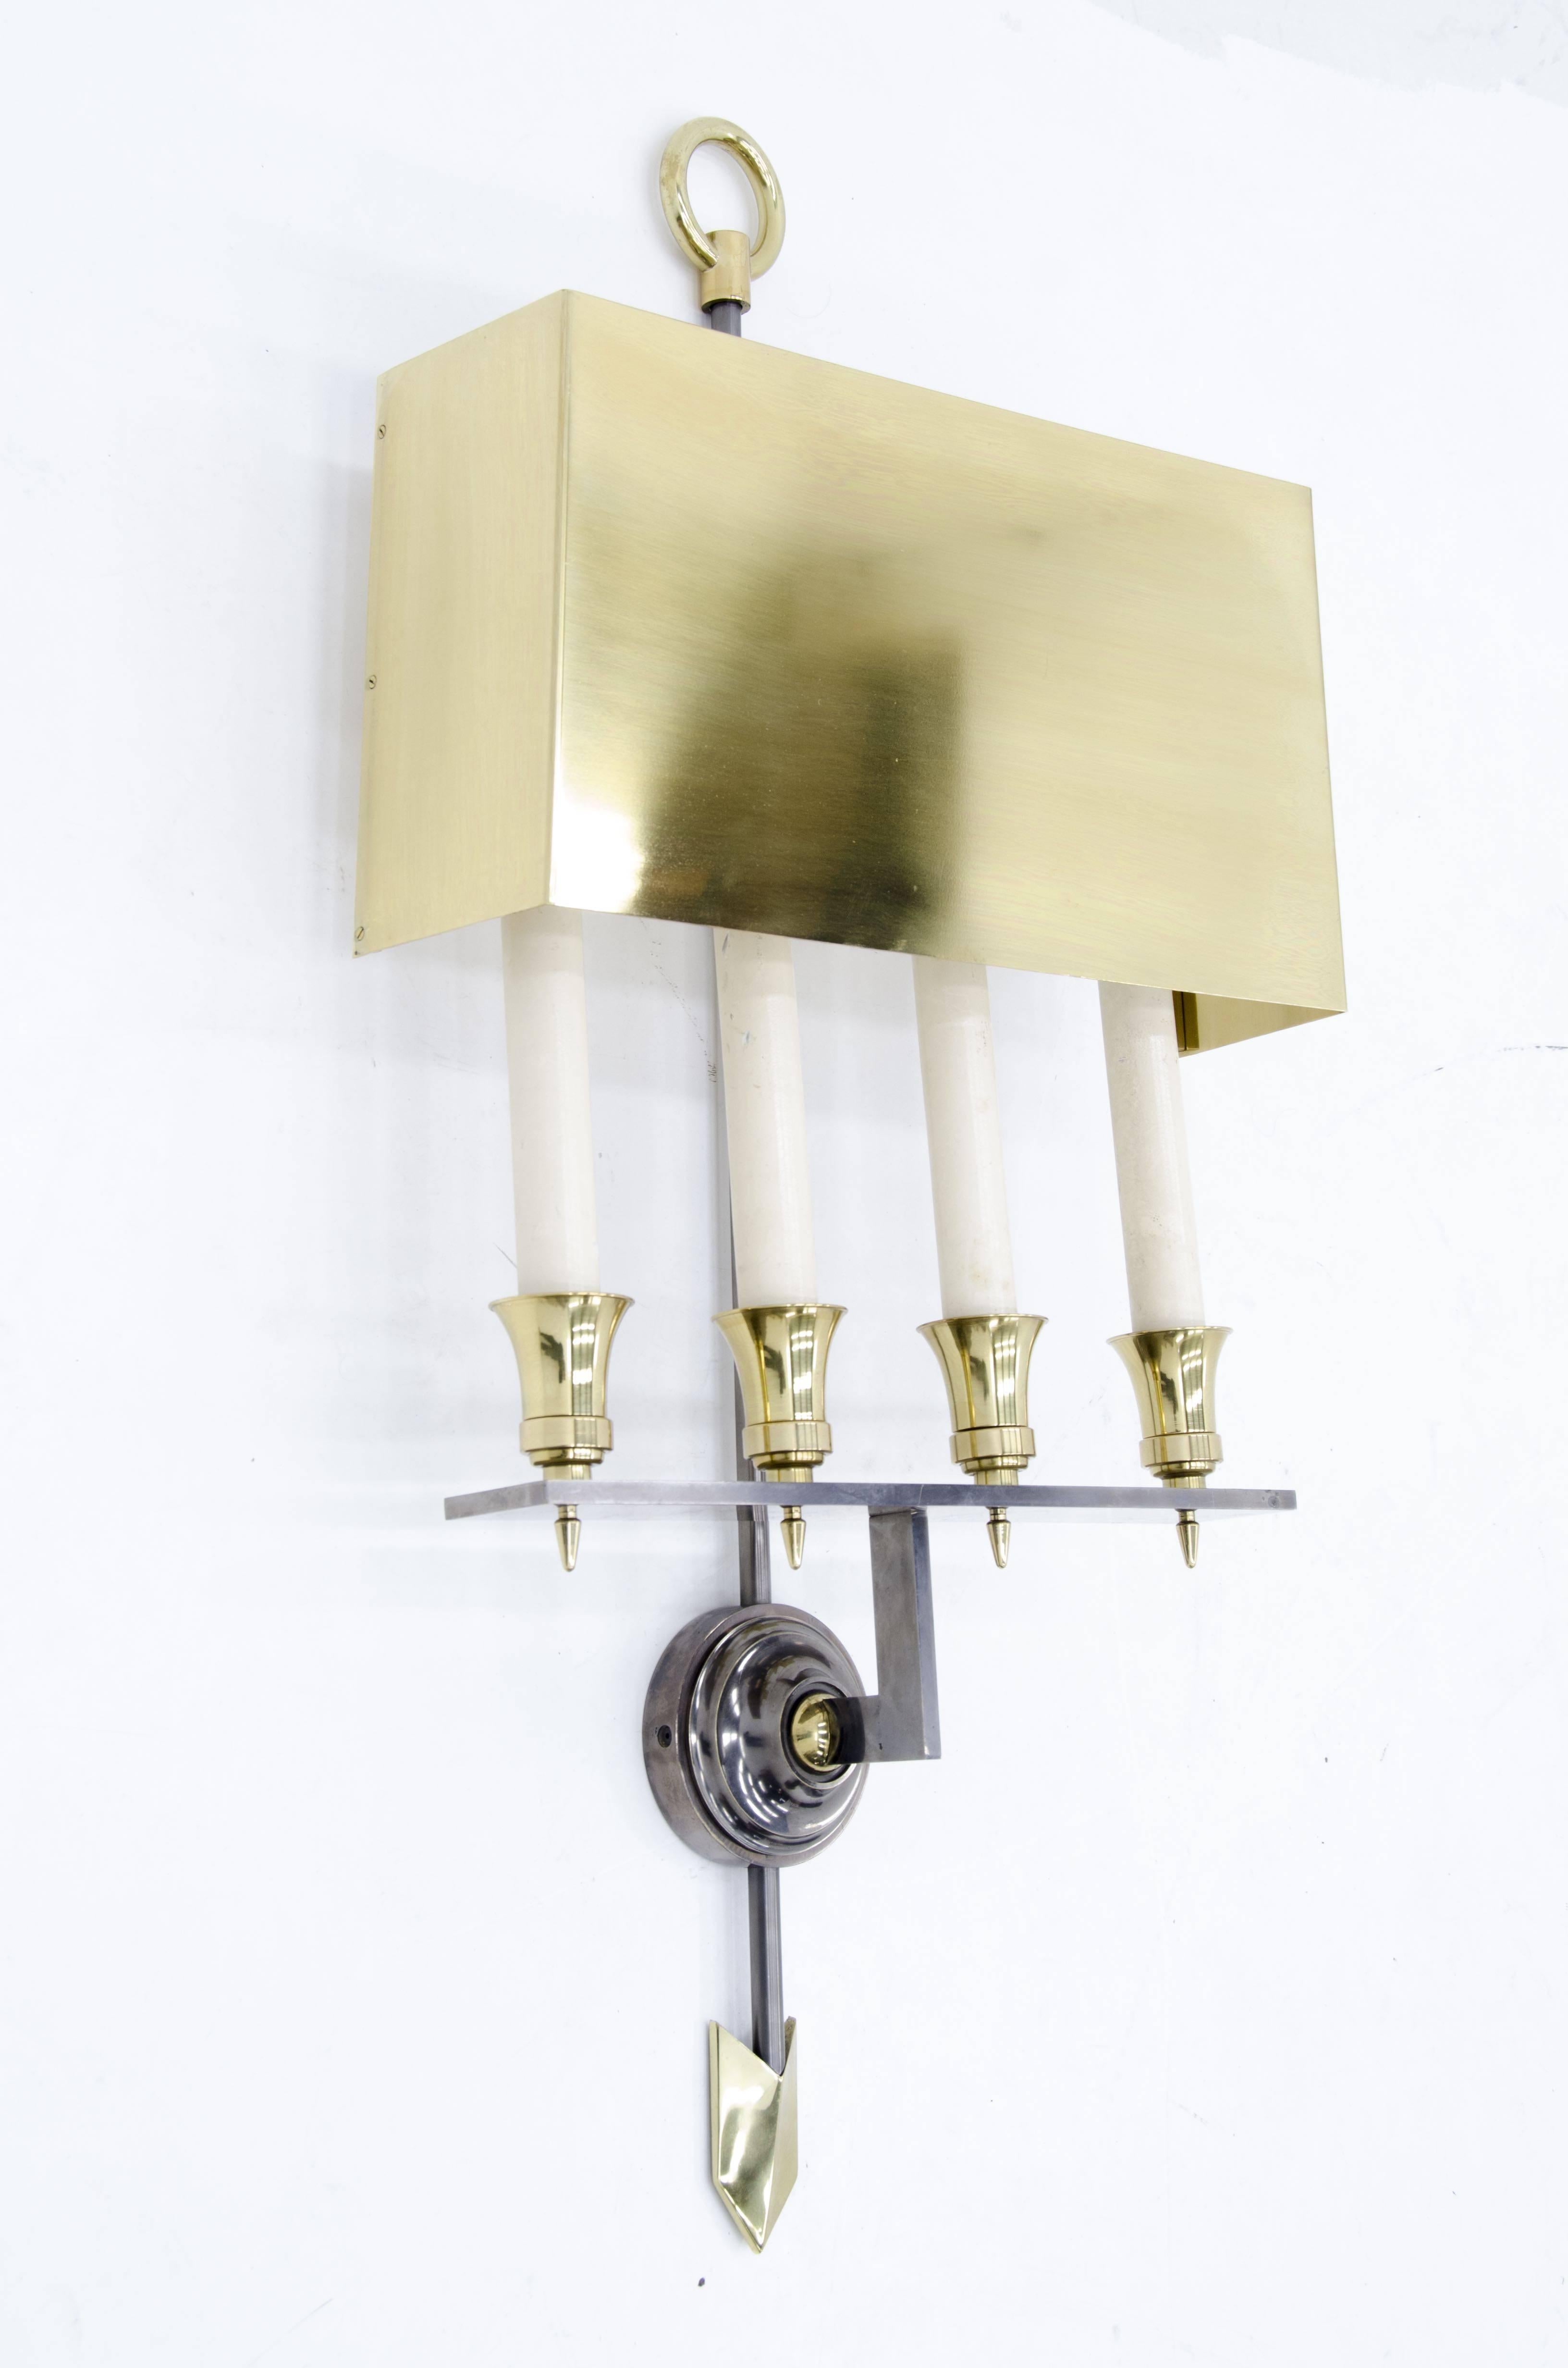 Pair of sconces by Gilbert Poillerat, circa 1960s in brass and steel (canon de fusil).